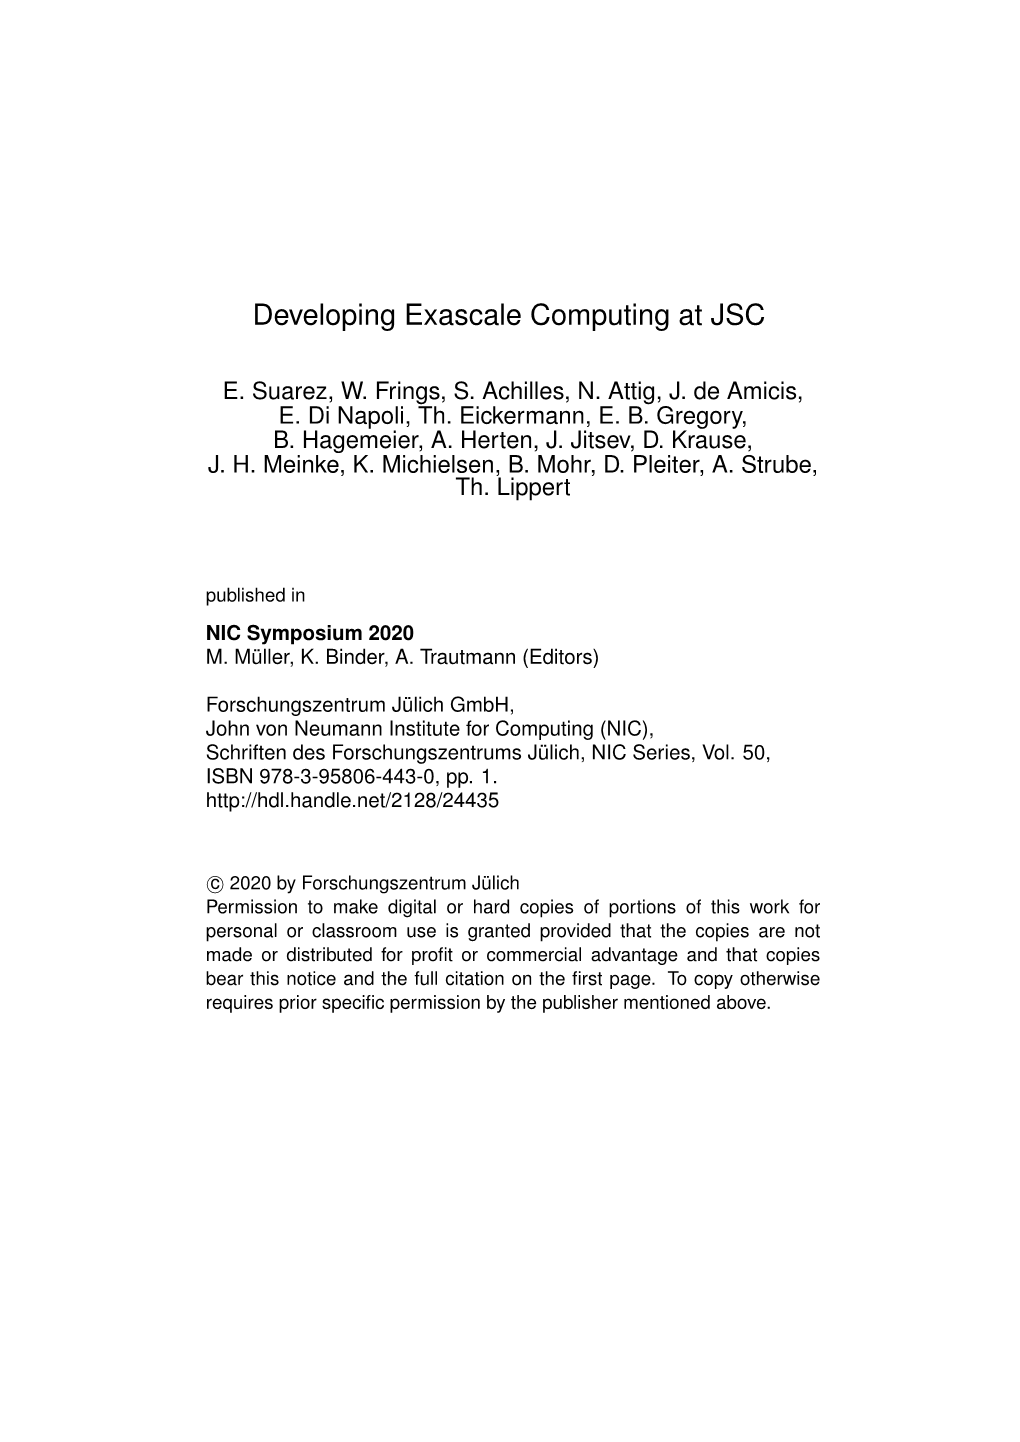 Developing Exascale Computing at JSC